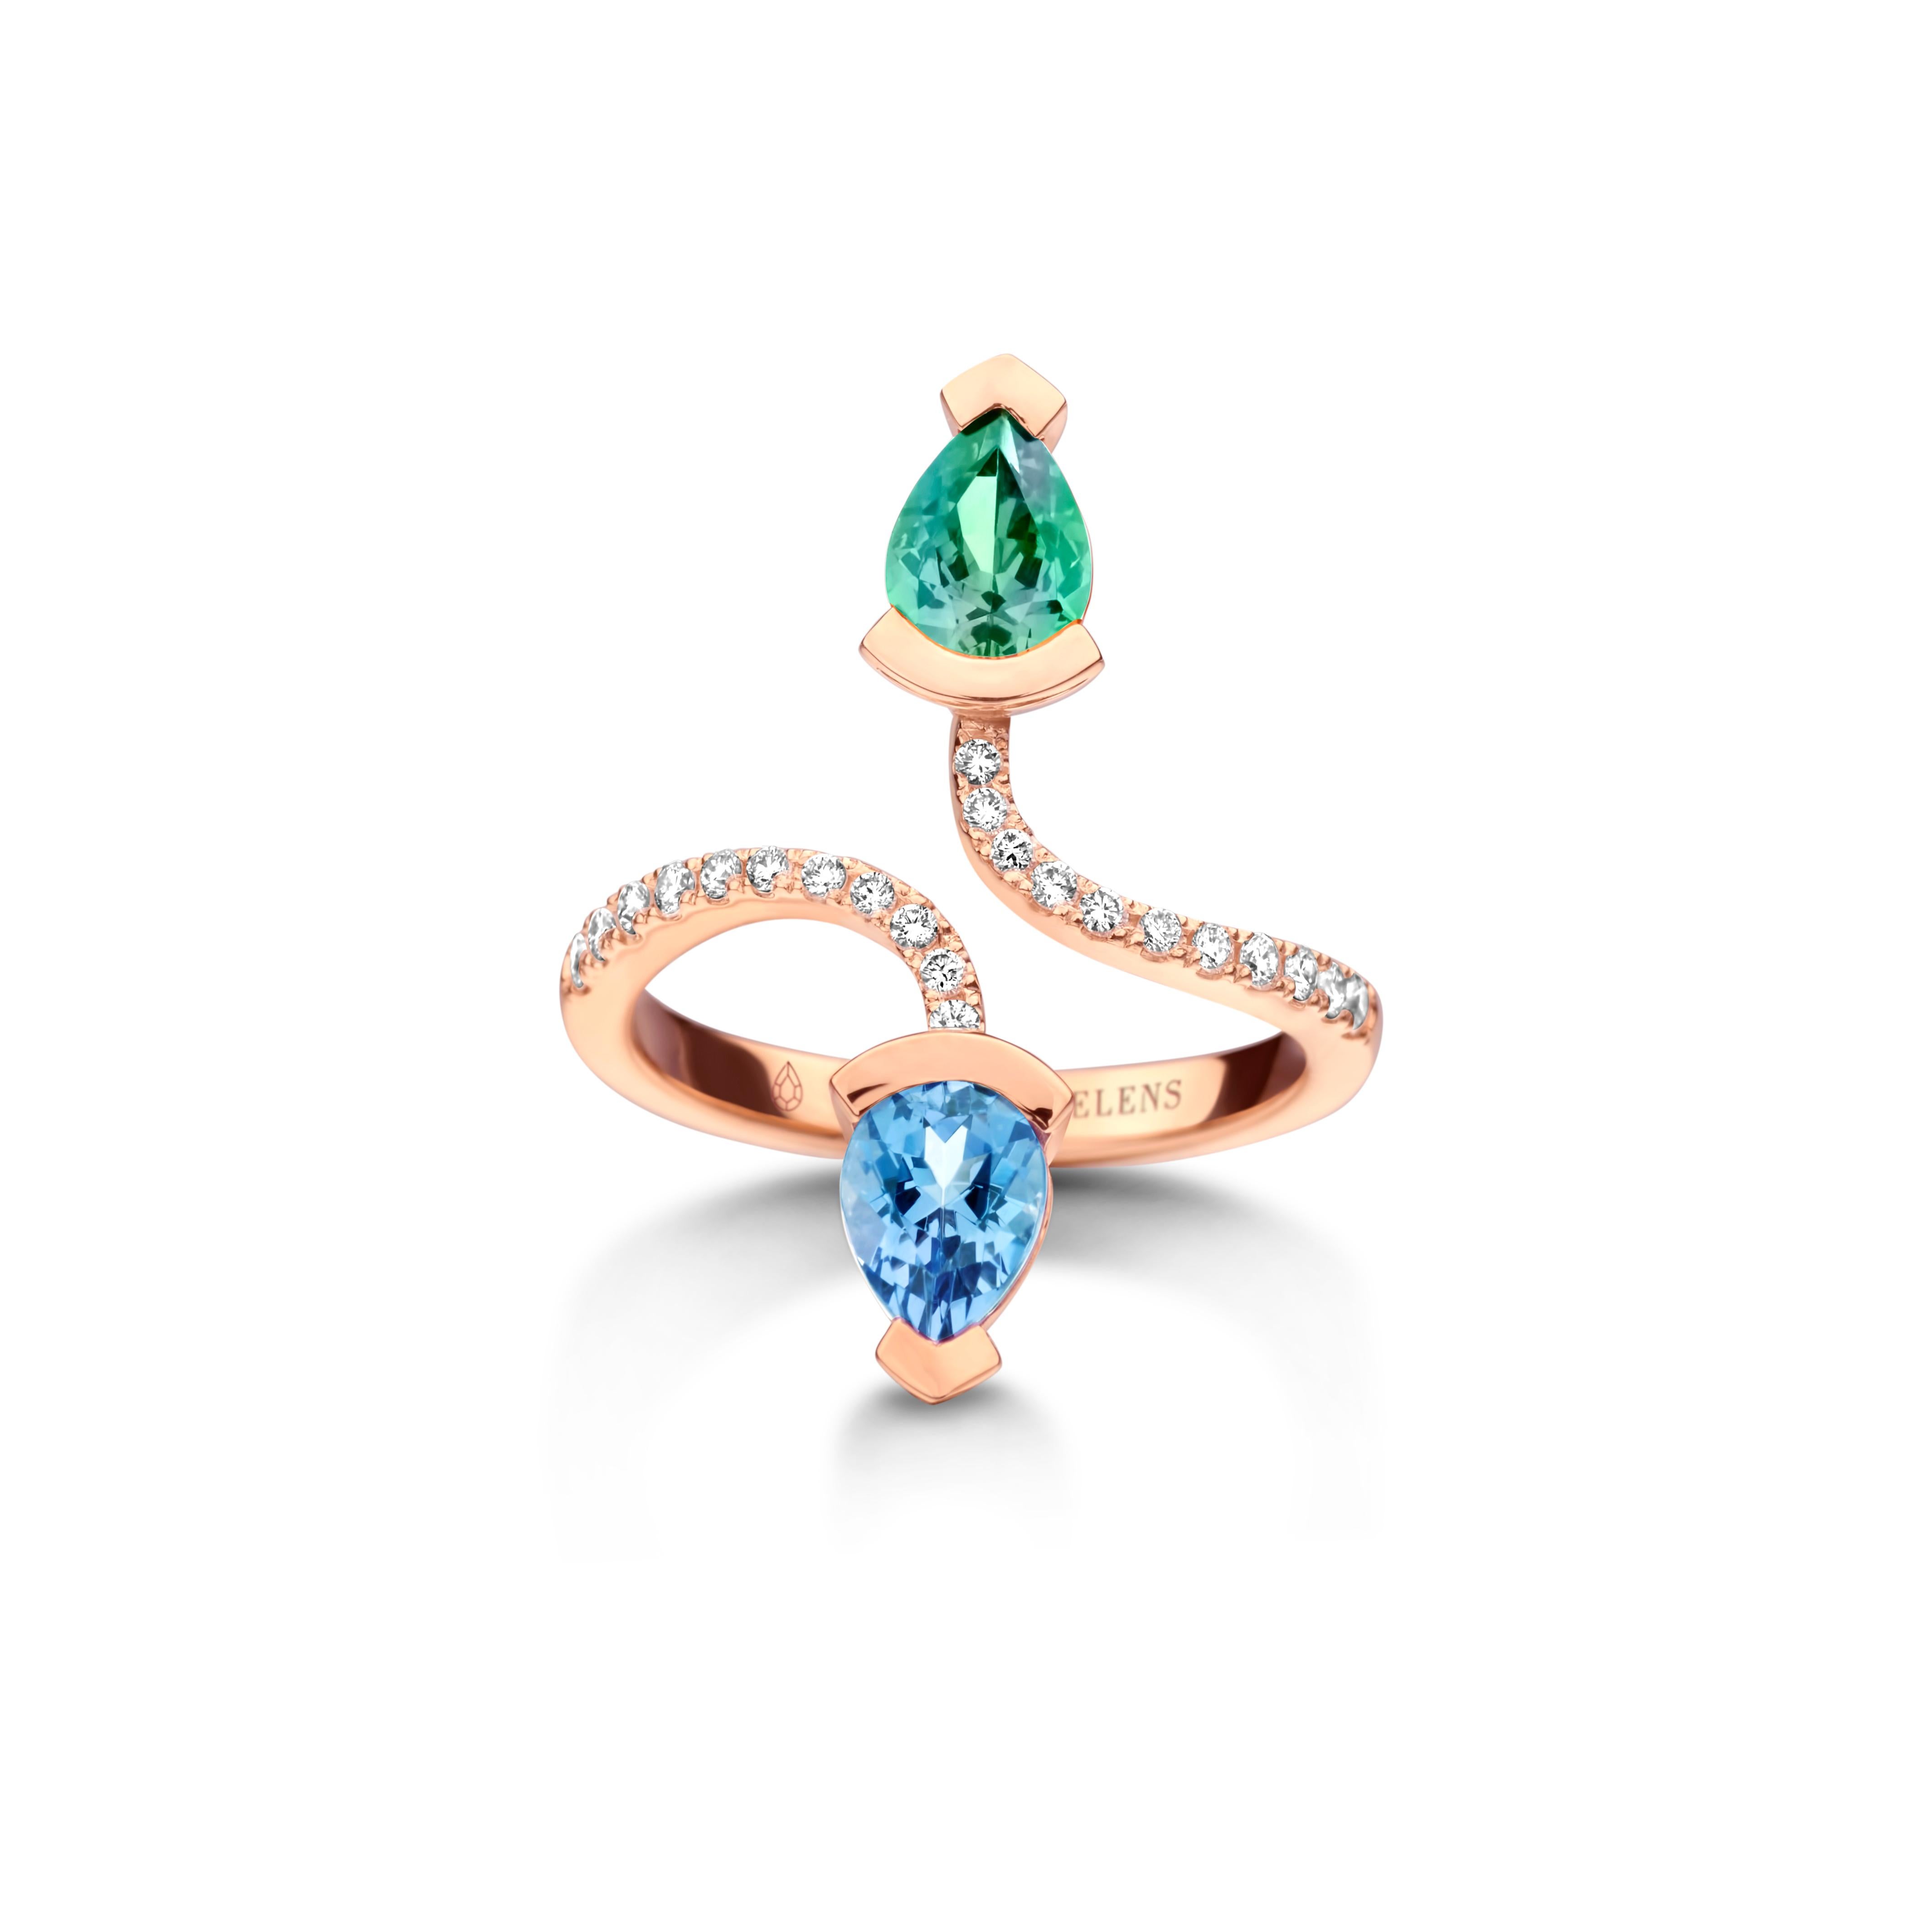 Adeline Duo ring in 18Kt yellow gold 5g set with a pear-shaped Santa Maria aquamarine 0,70 Ct, a pear-shaped mint tourmaline 0,70 Ct and 0,19 Ct of white brilliant cut diamonds - VS F quality. Celine Roelens, a goldsmith and gemologist, is